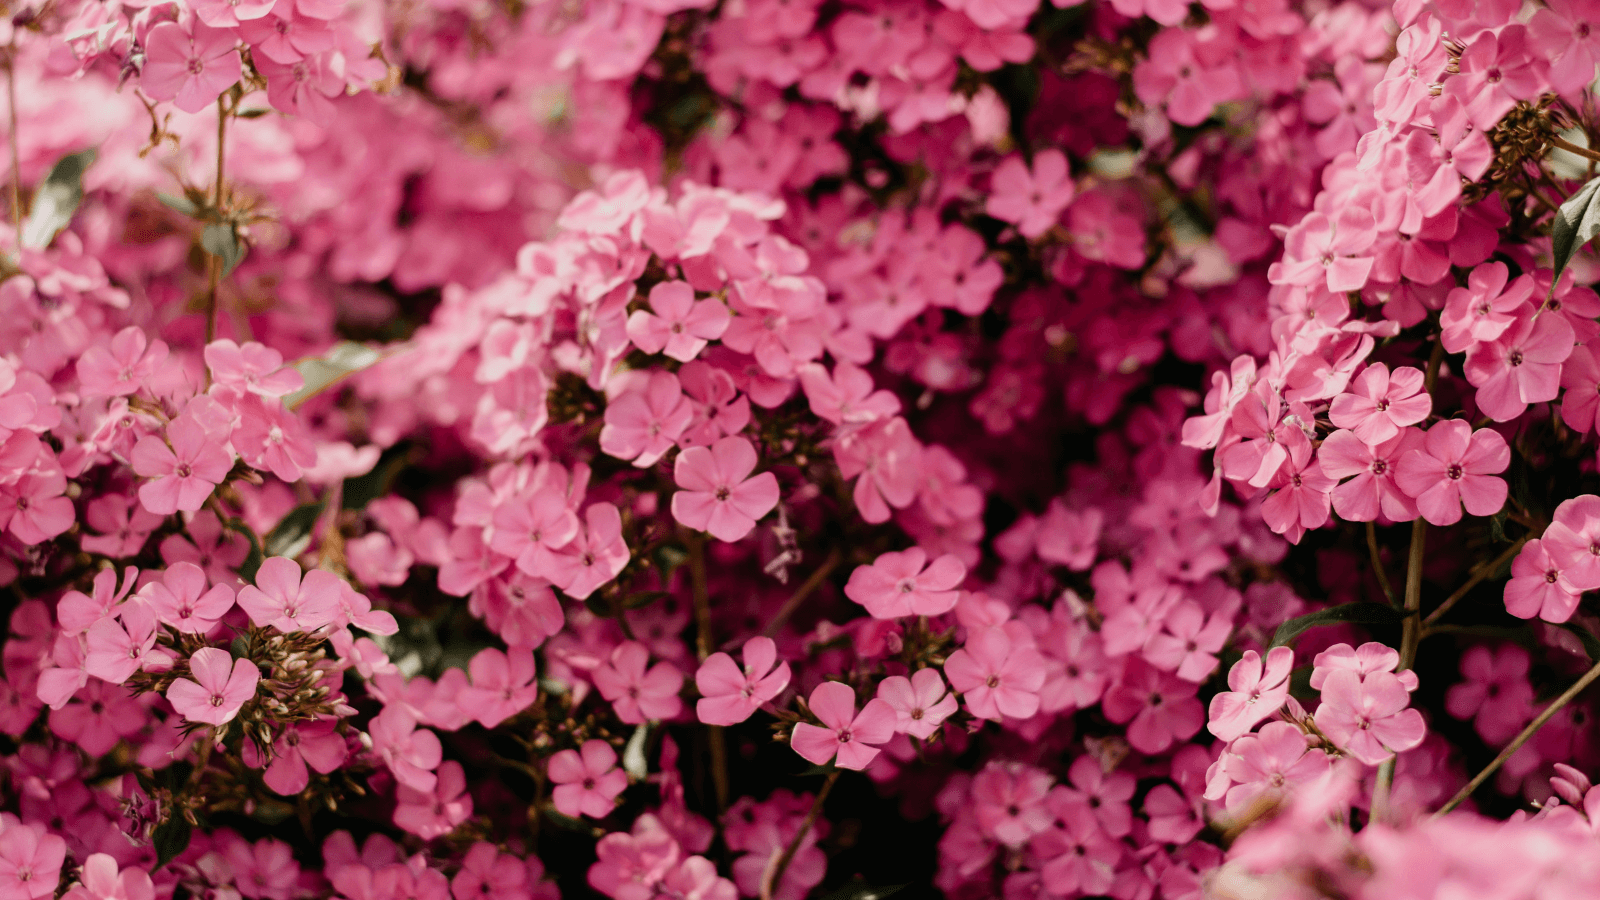 A photo of pink blossoms